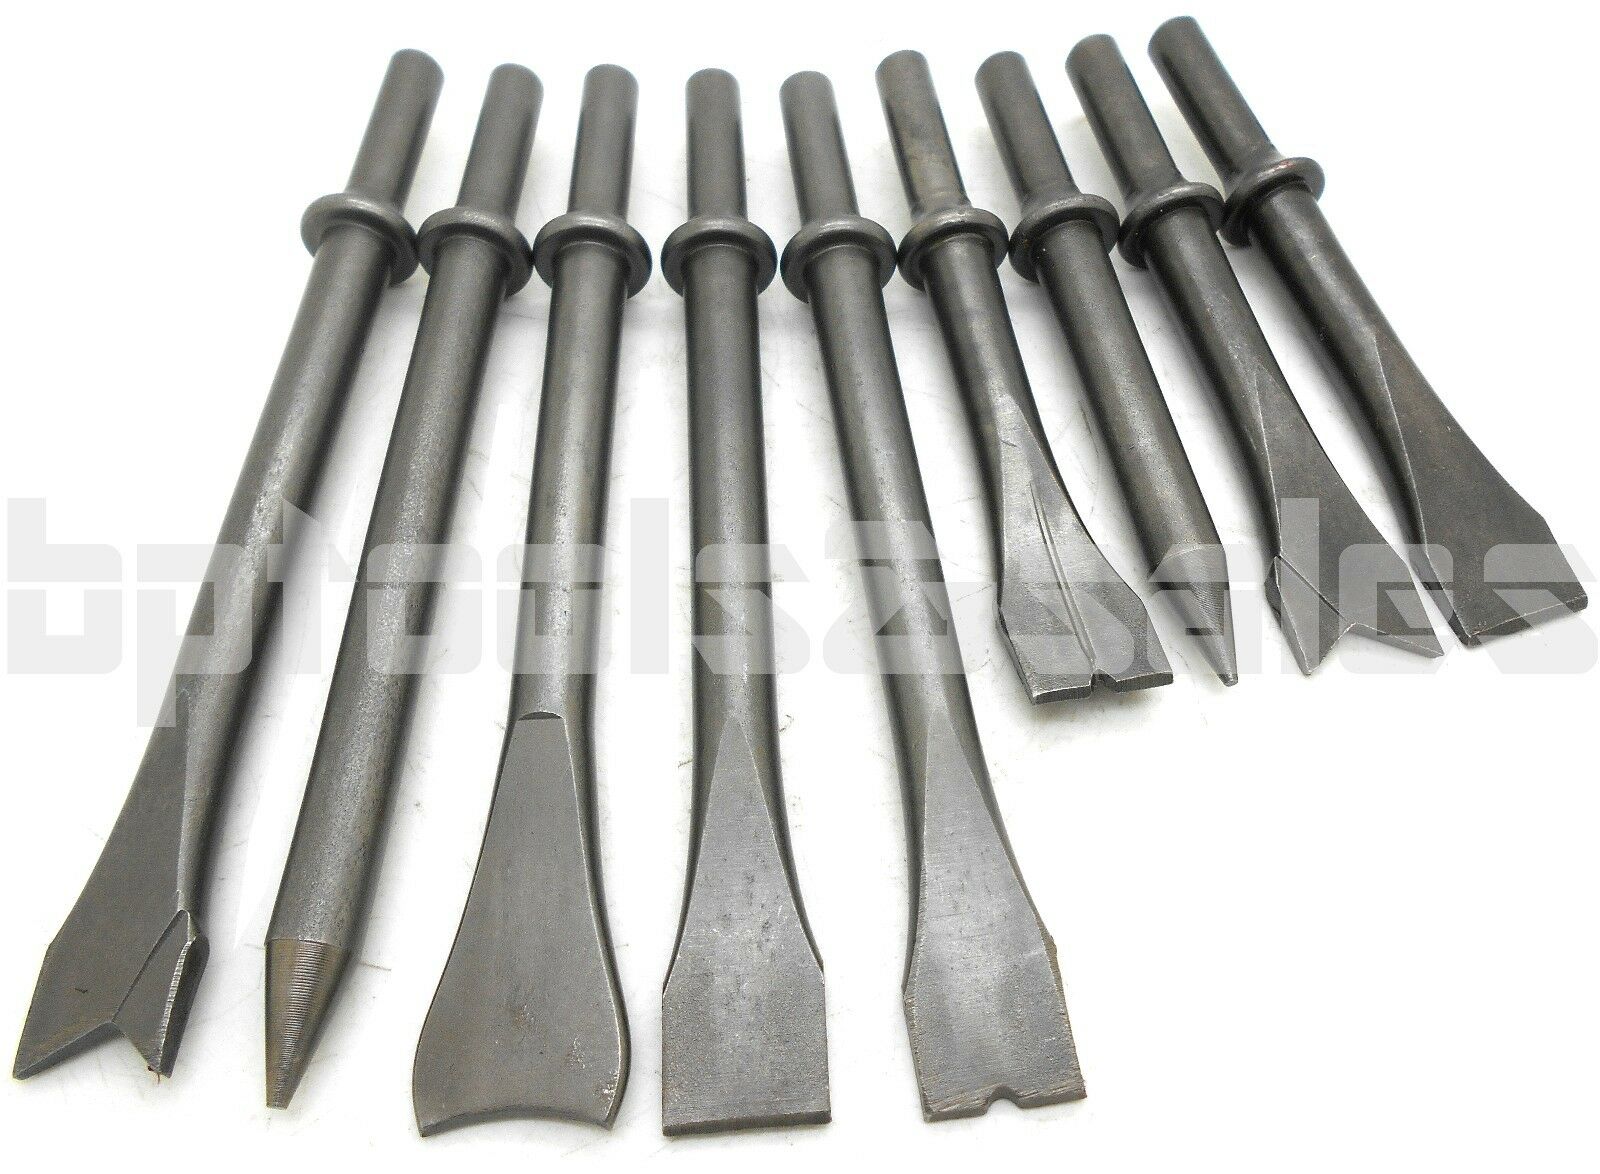 9 Pc Air Hammer Chisel Set Tapered Ripping Bushing Chipping Punch Chisel Set